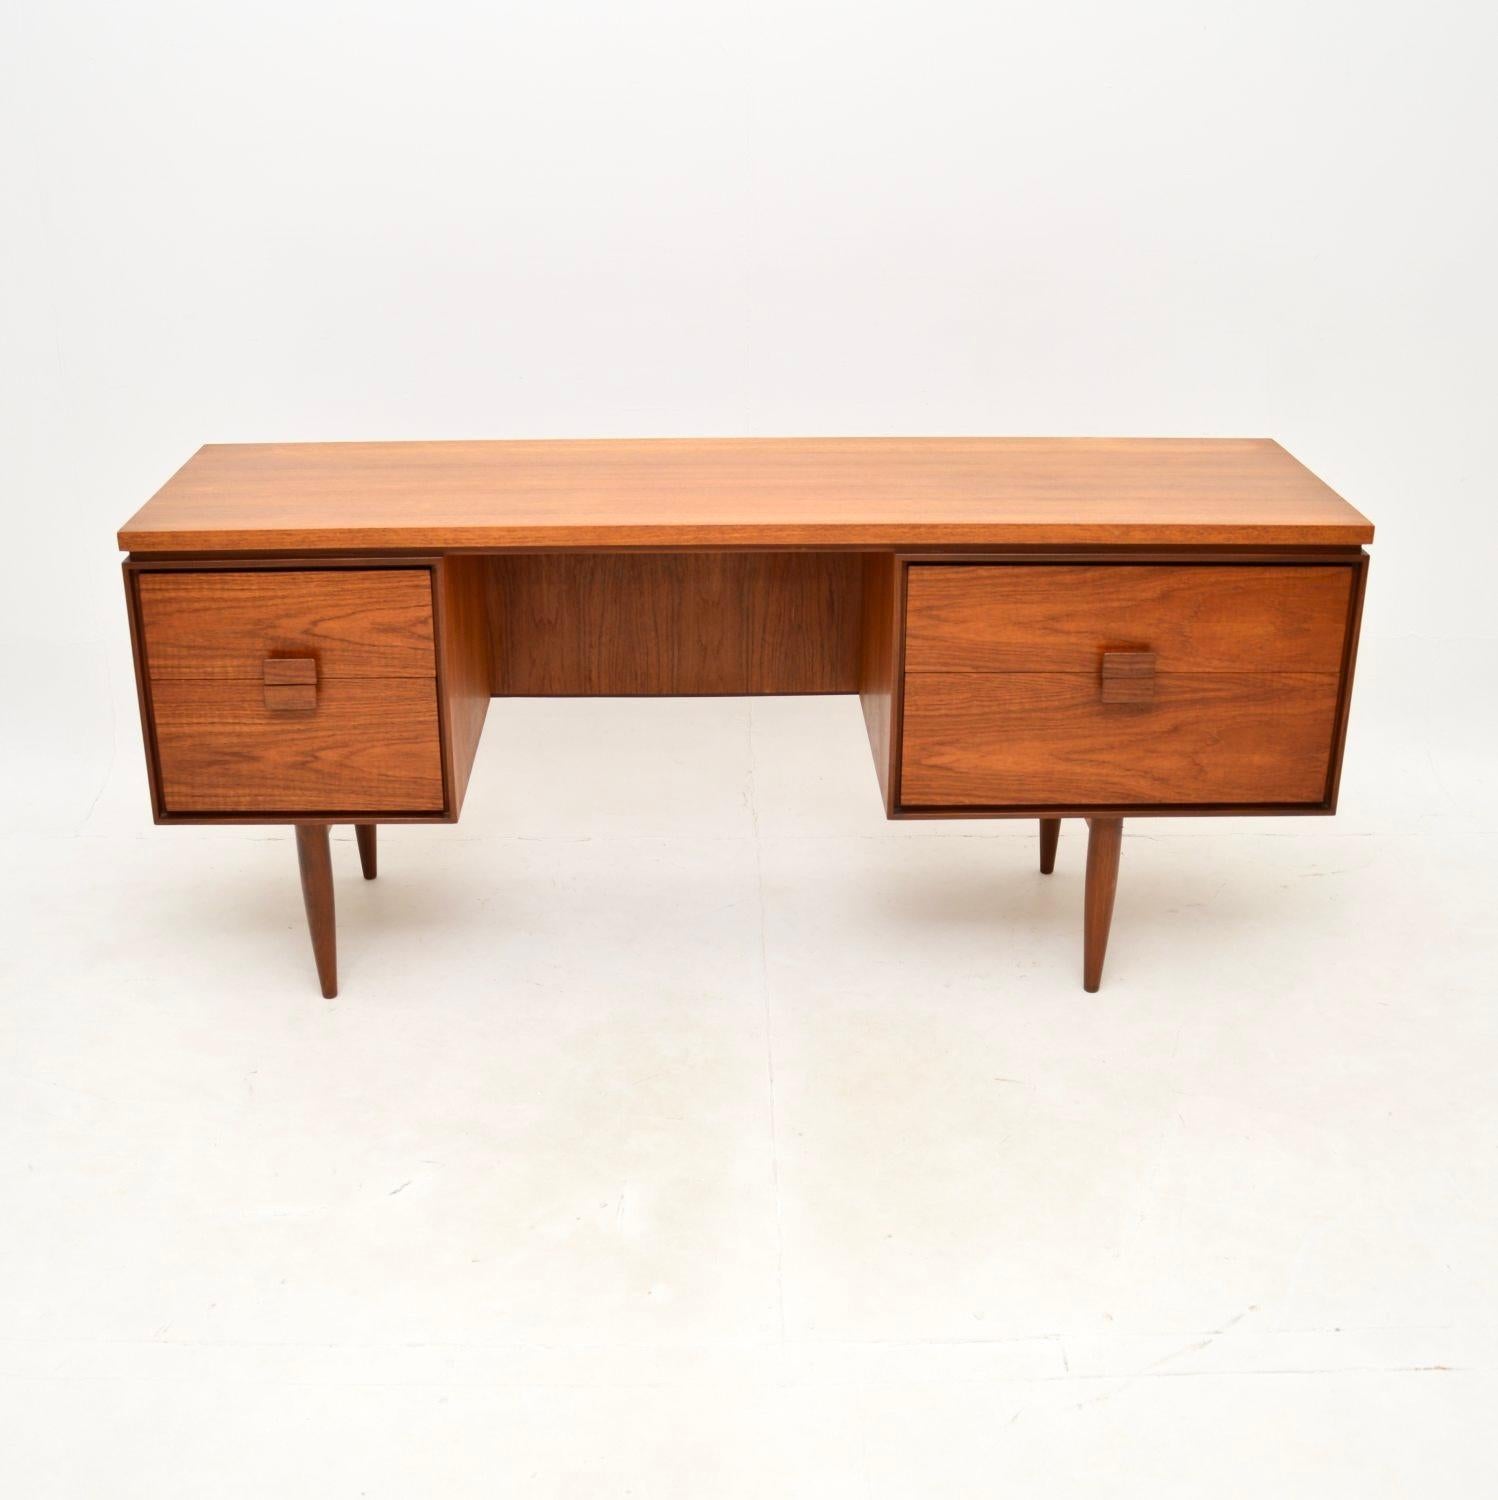 A very stylish and extremely well made vintage Danish teak desk by Kofod Larsen for G Plan. This was designed by the famous Danish designer IB Kofod Larsen for the G Plan Danish range, it was made in England in the 1960’s.

The quality is superb,